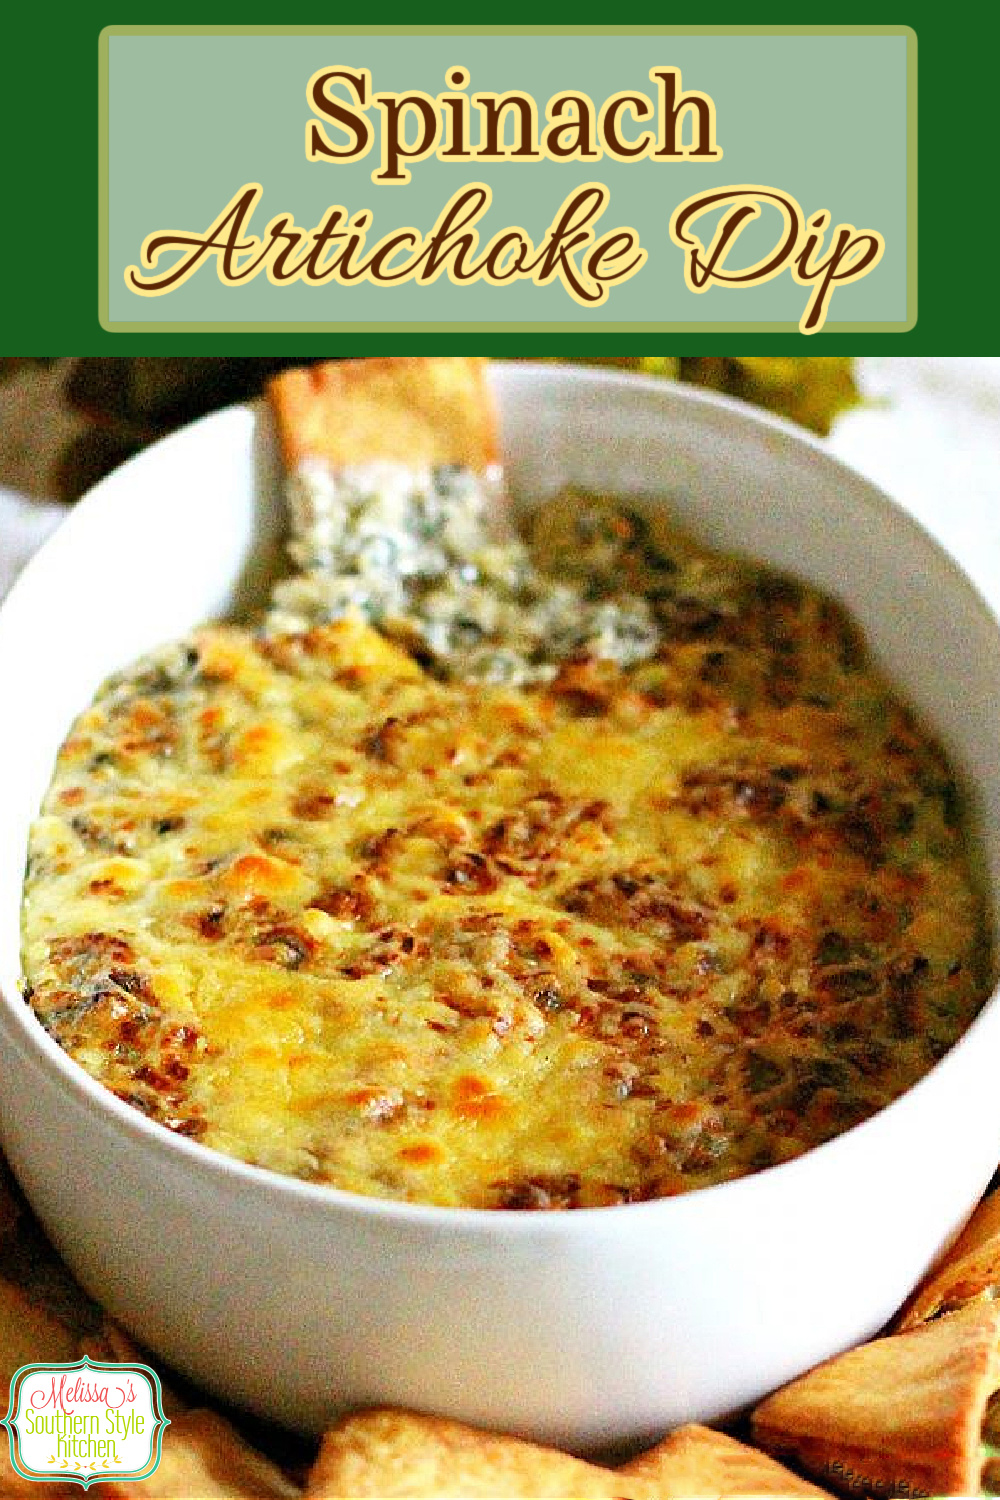 Enjoy this gooey Italian Spinach Artichoke Dip for entertaining friends, as a holiday starter or game day snacking. #spinachartichokedip #spinachdip #artichokedip #diprecipes #appetizers #easyrecipes #bakedspinachdip #southernfood #southernrecipes #Italian #snacks #footballfood via @melissasssk